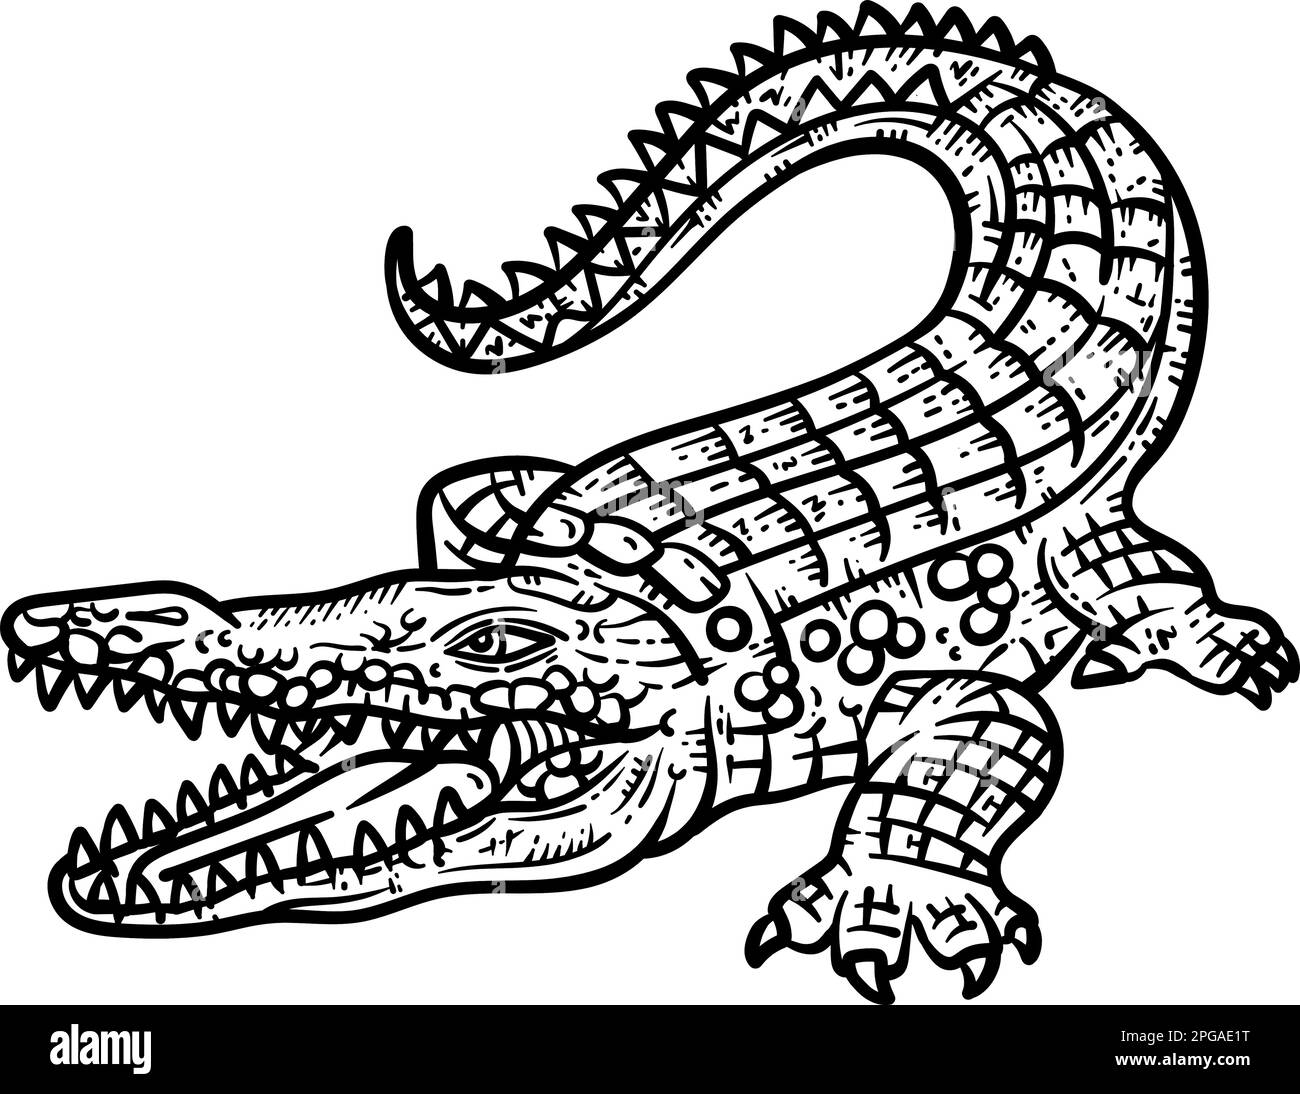 Crocodile drawing black and white stock photos images